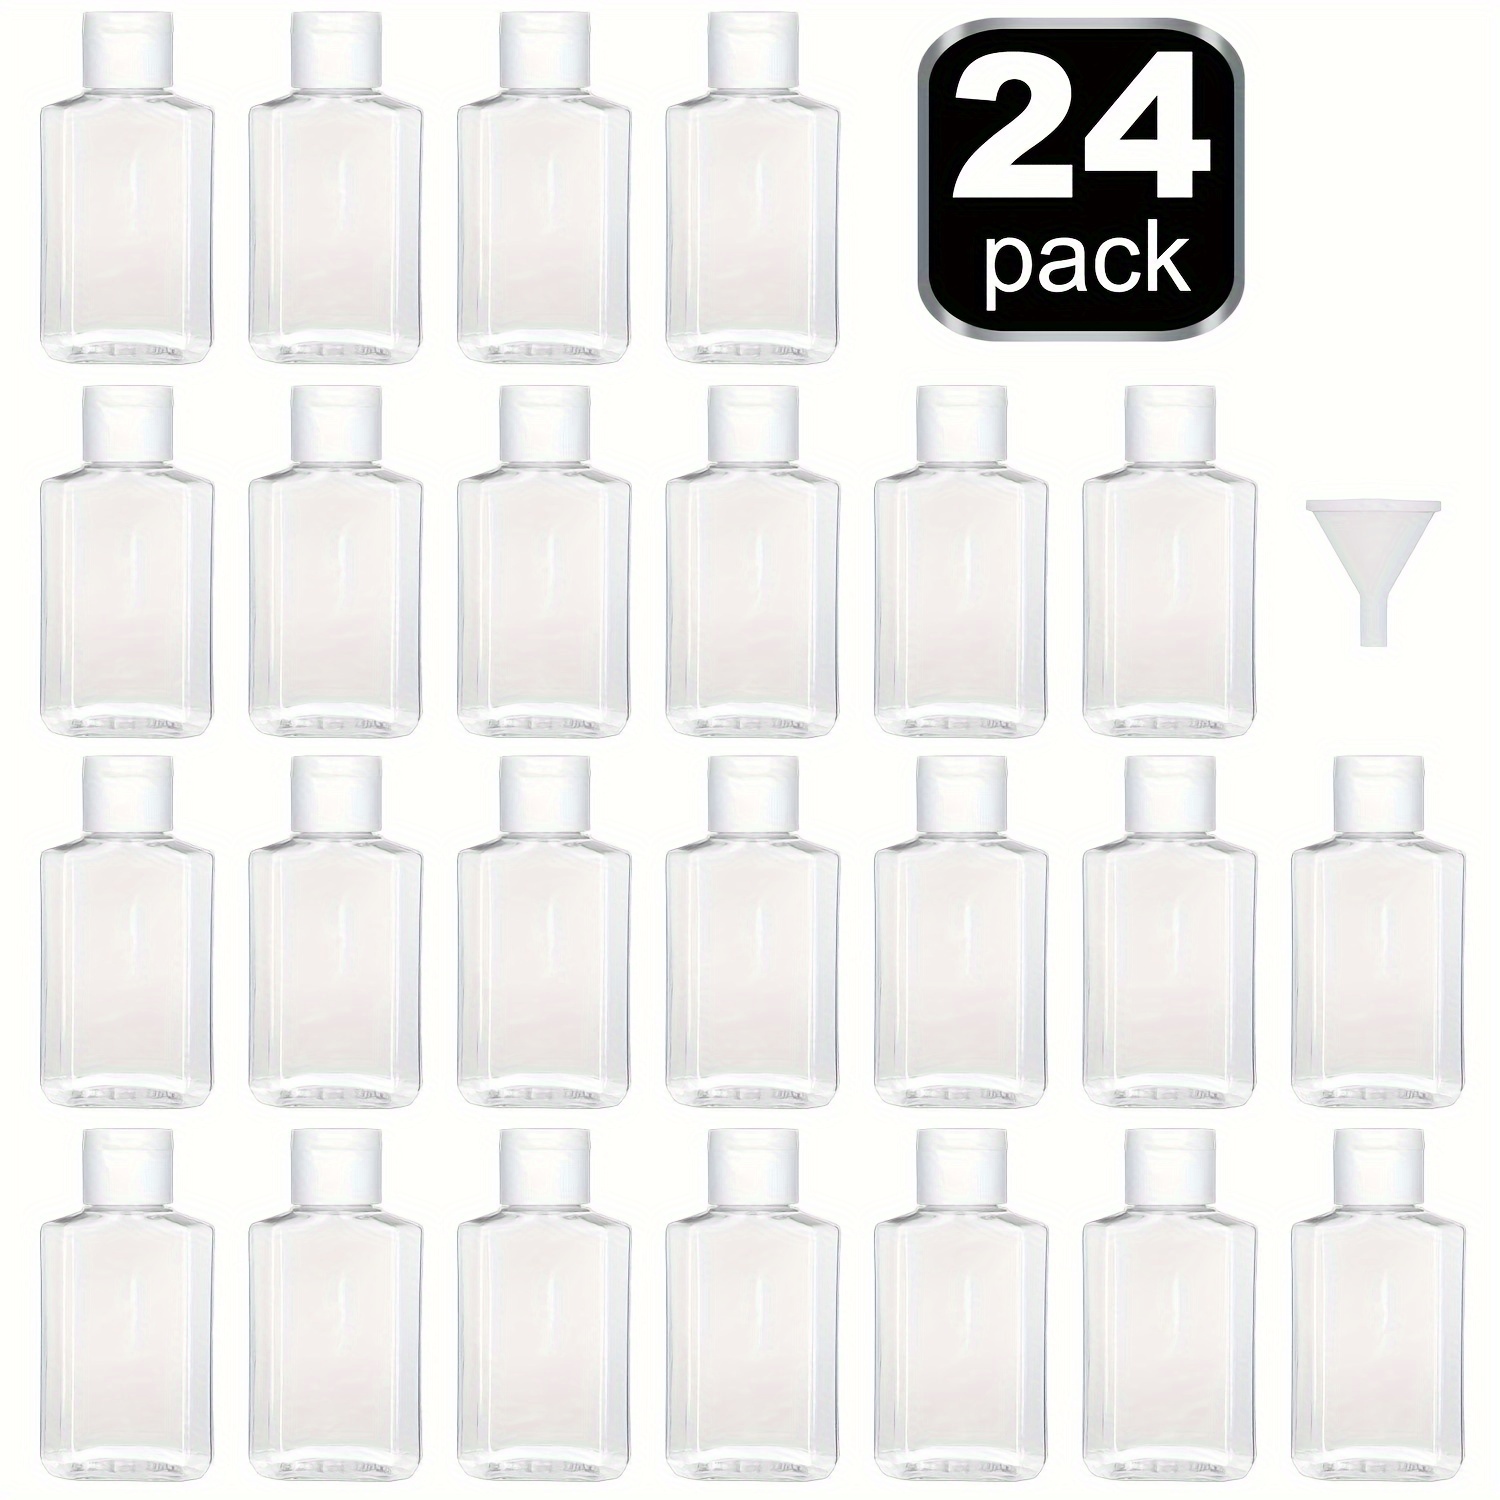 Empty Clear Plastic Bottles 2 Oz, Small Travel Bottles Set, Refillable  Bottles with Flip Caps, TSA Approved. PERFECT USE AS REFILLABLE HAND  SANITIZER